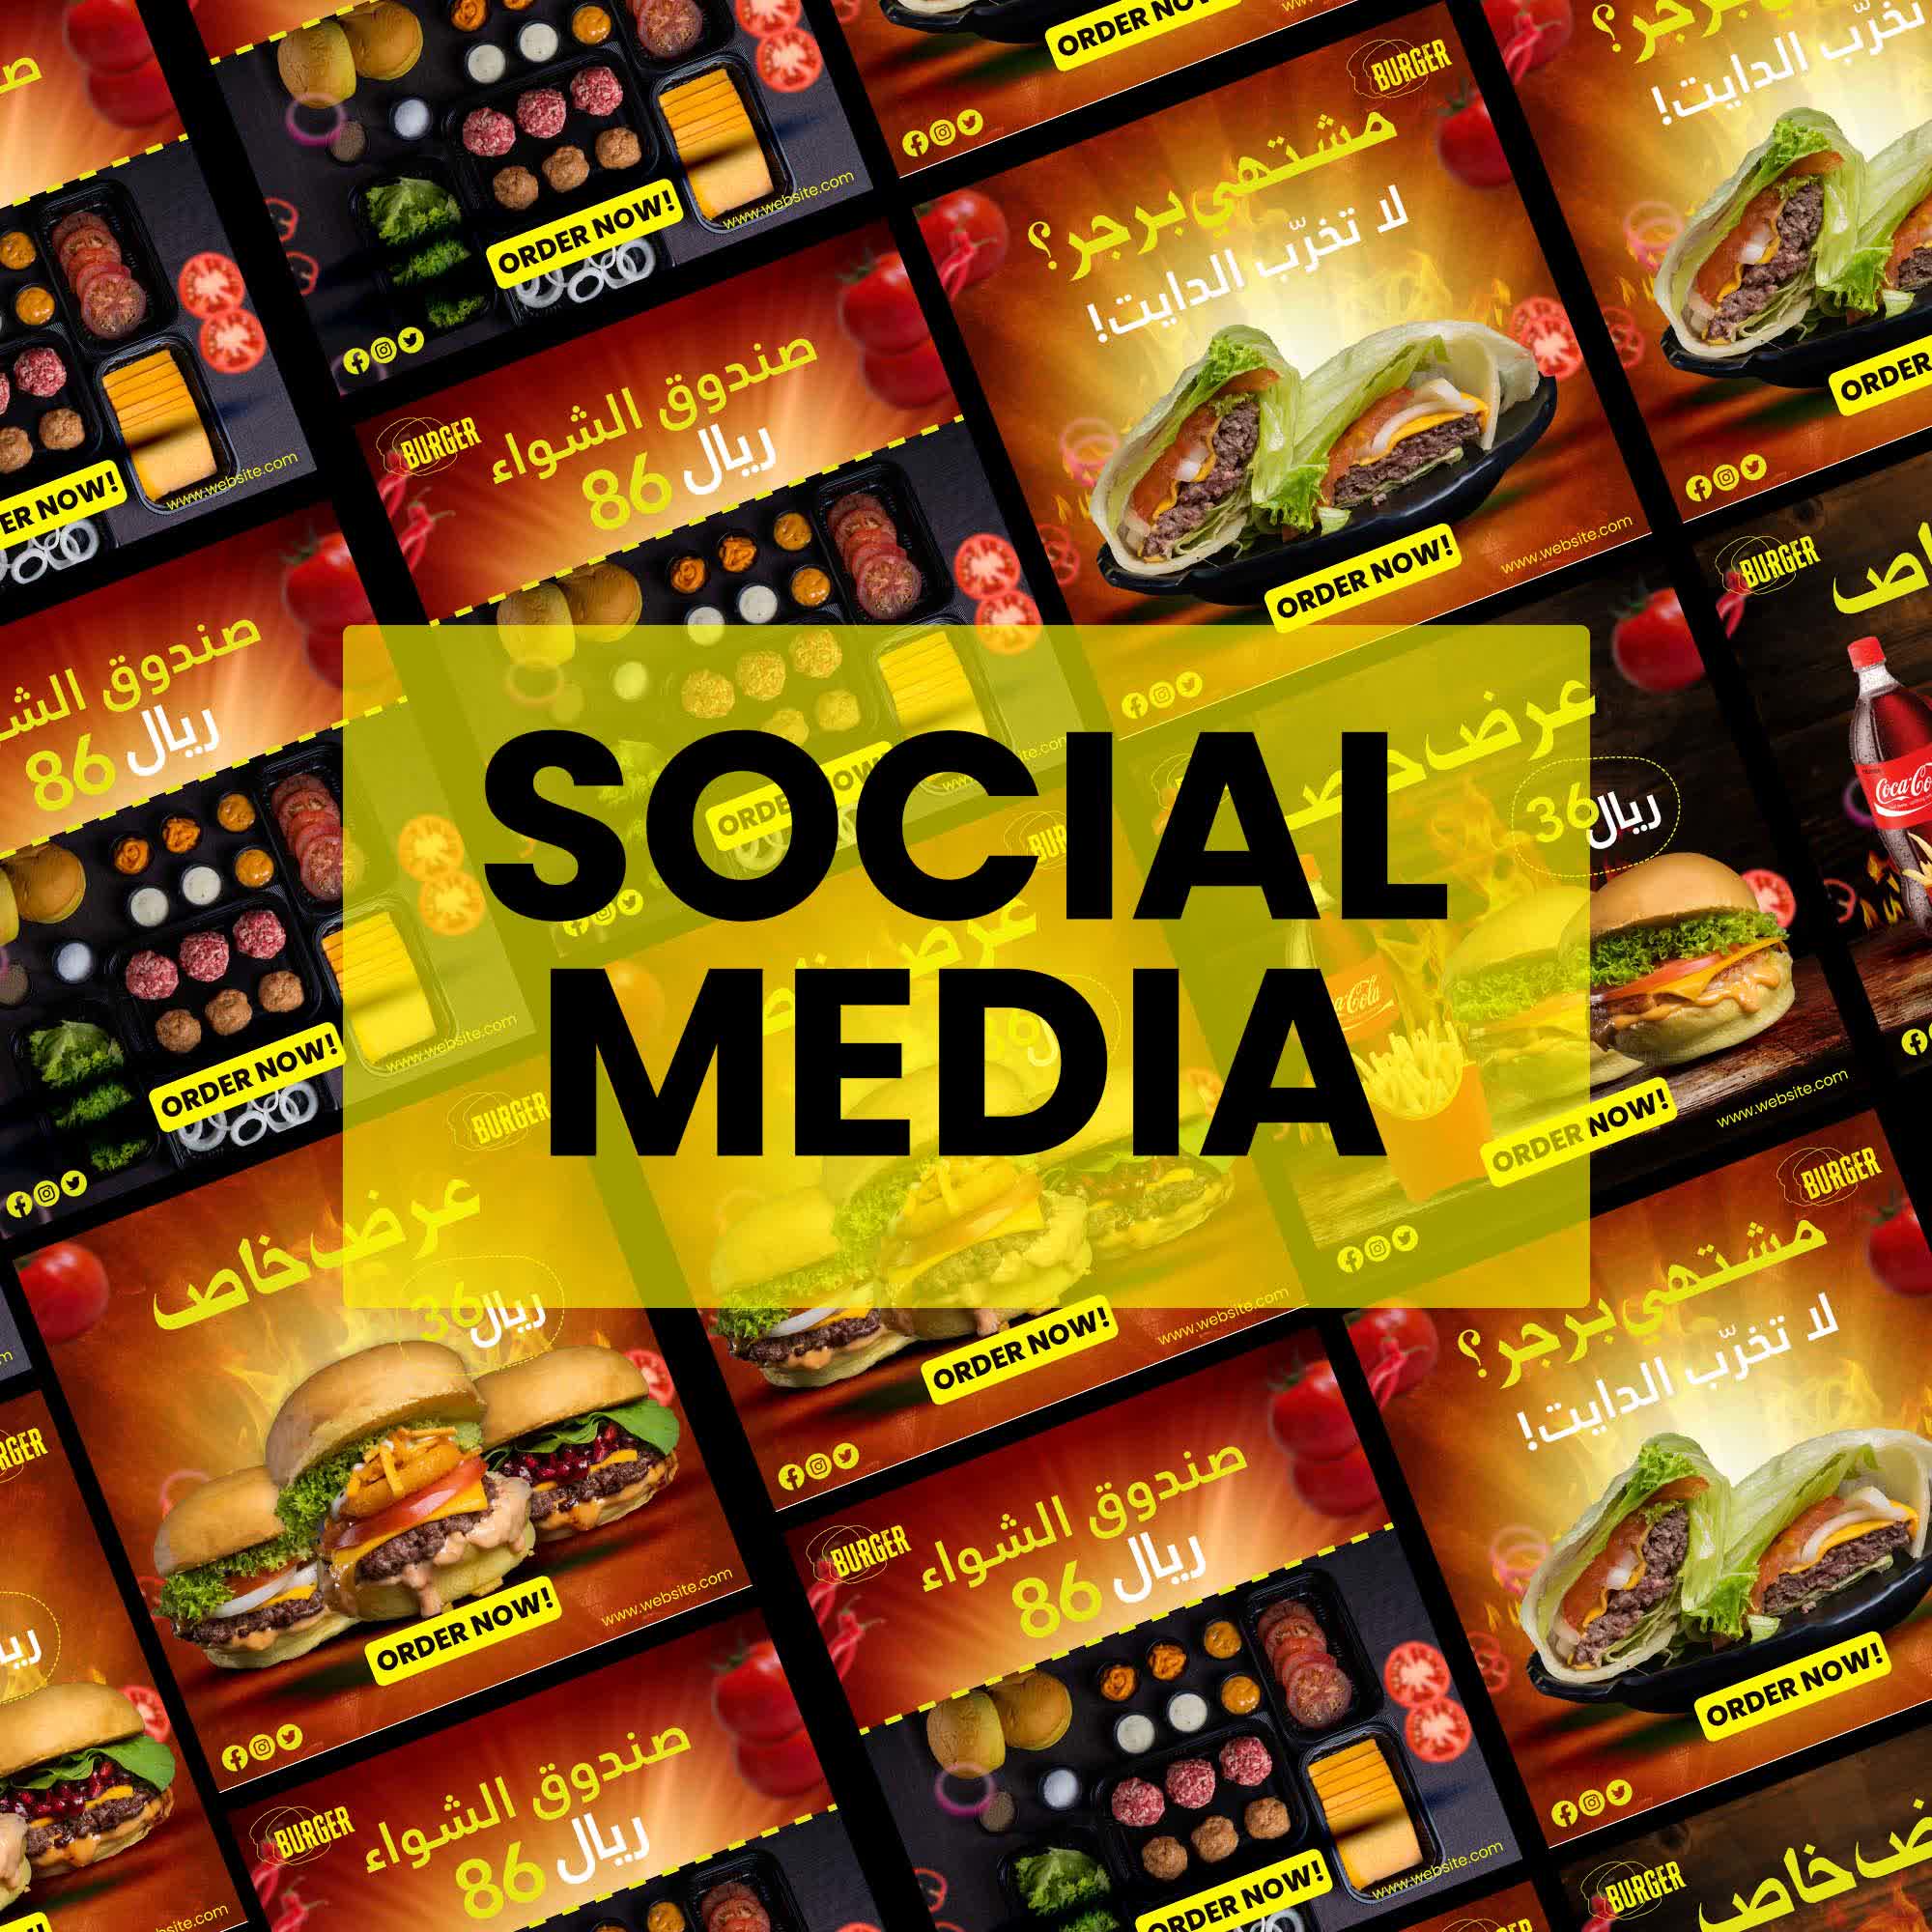 Food Social Media Campaign cover image.